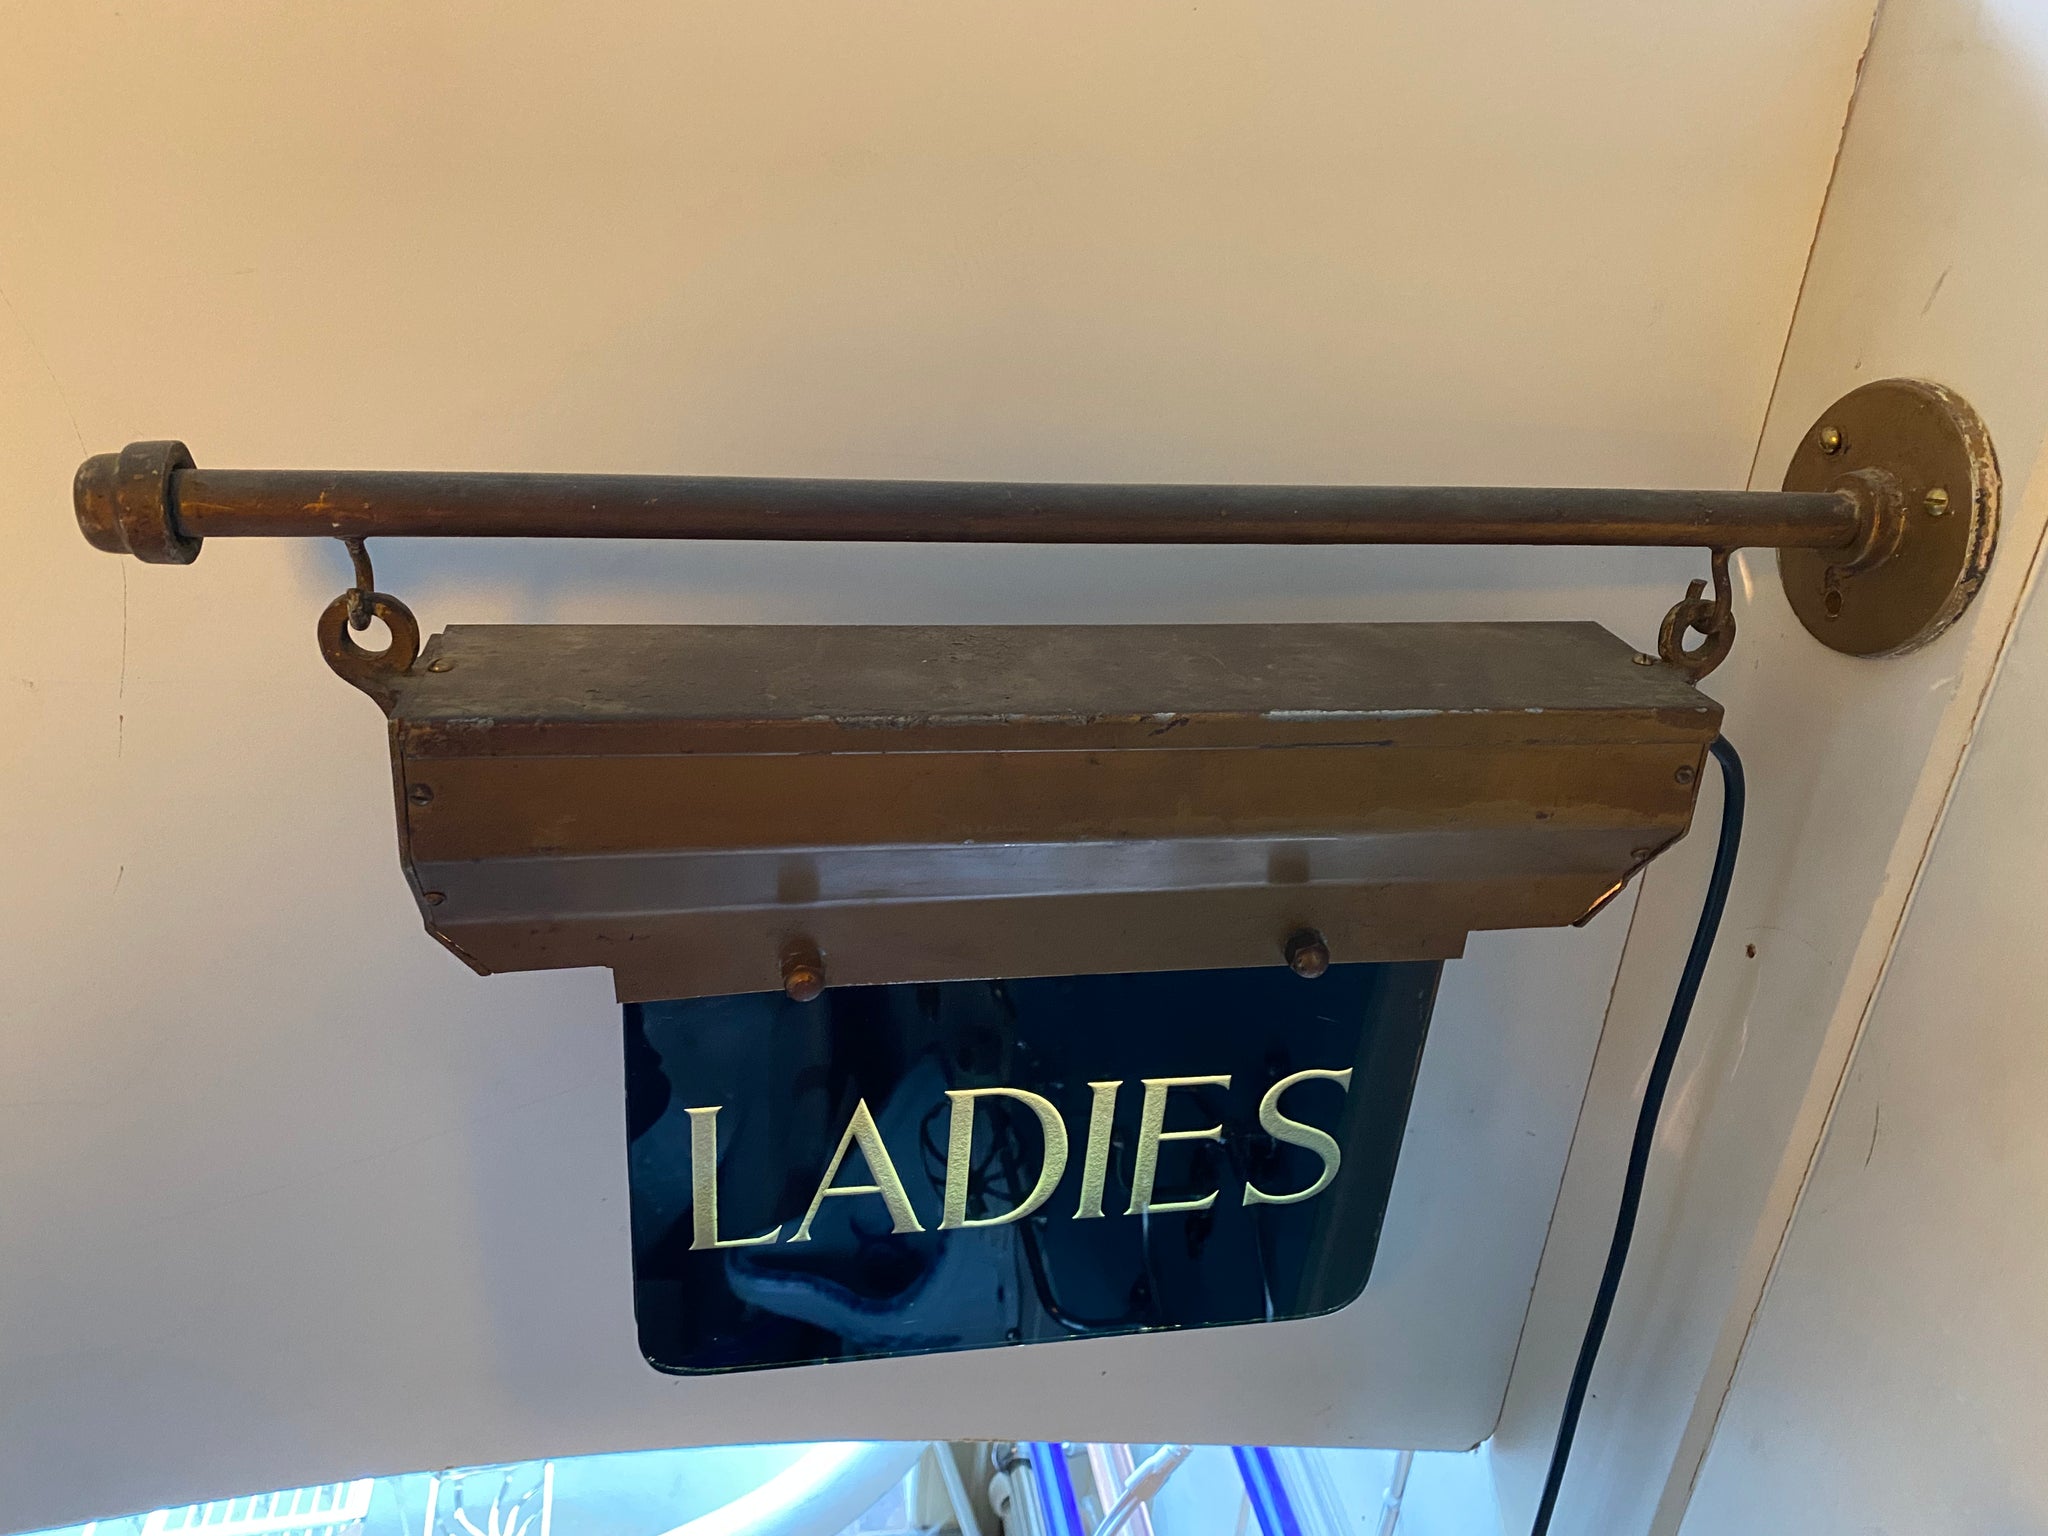 Wall-Fixing Illuminated Glass "LADIES" Double-Sided WC Sign C.1930